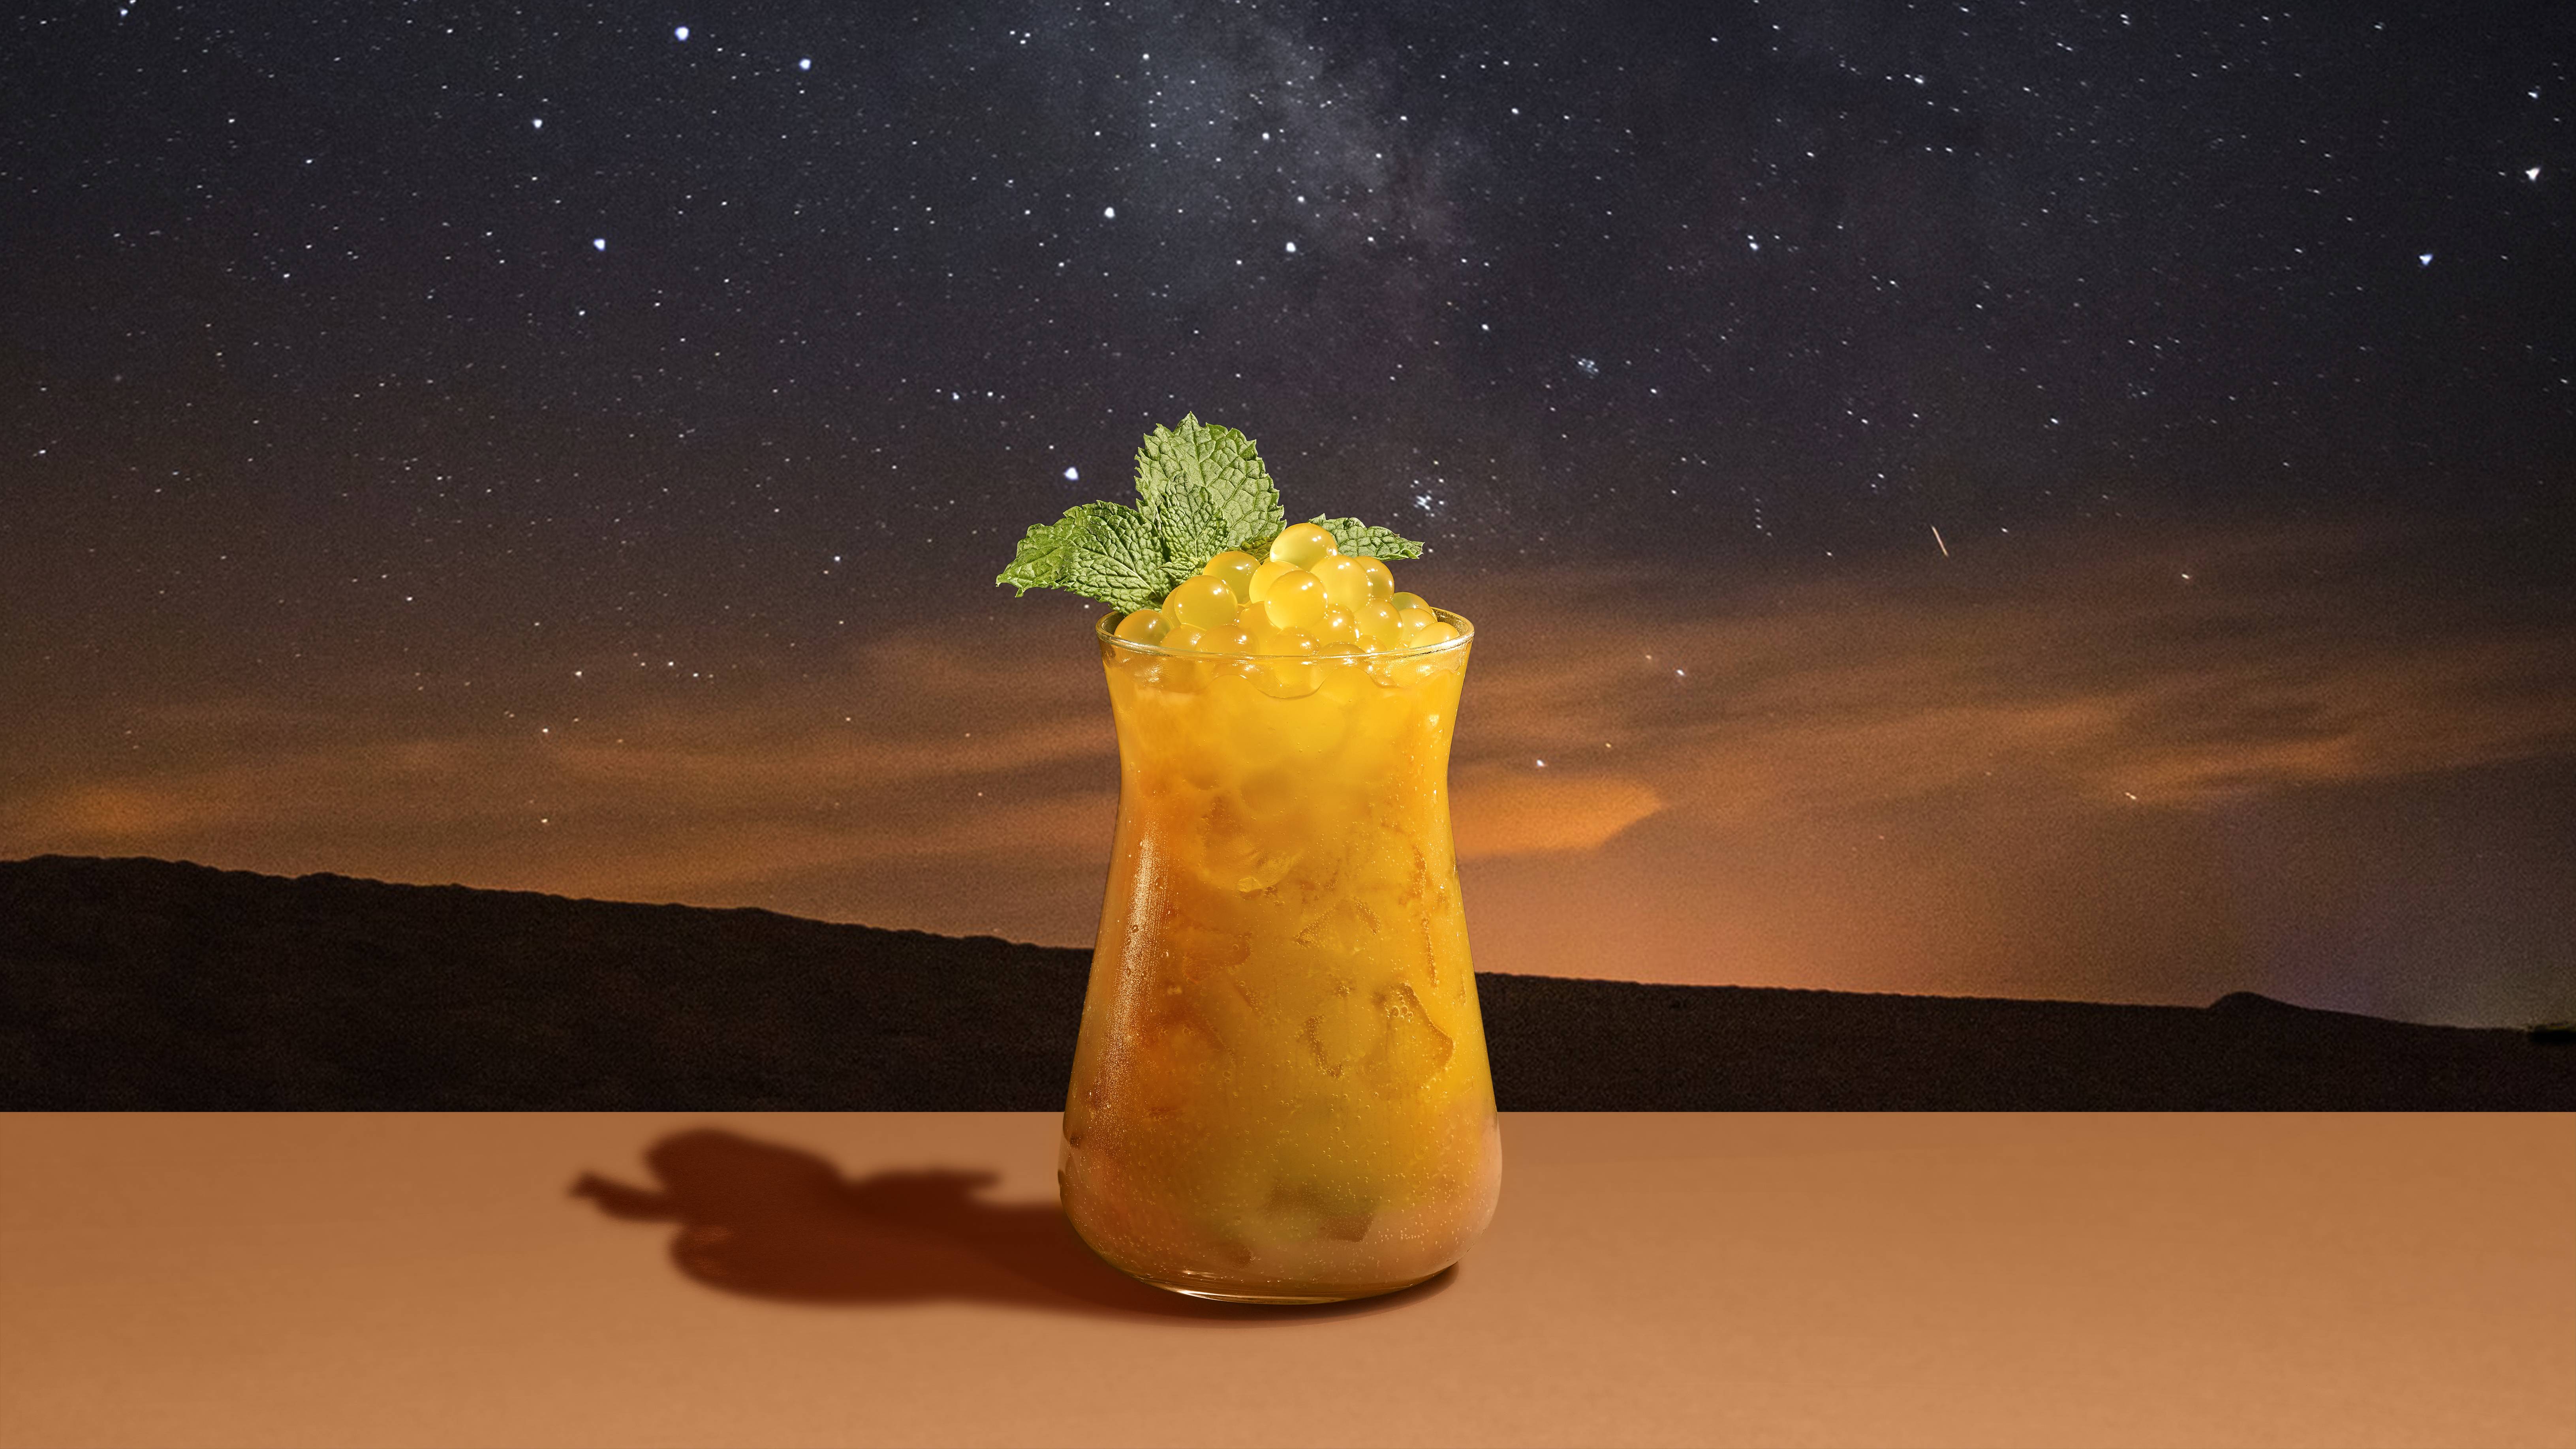 Celebrating 2 Years of Cosmic Dining - Space 220 Restaurant at EPCOT unveils new cocktails and mocktails